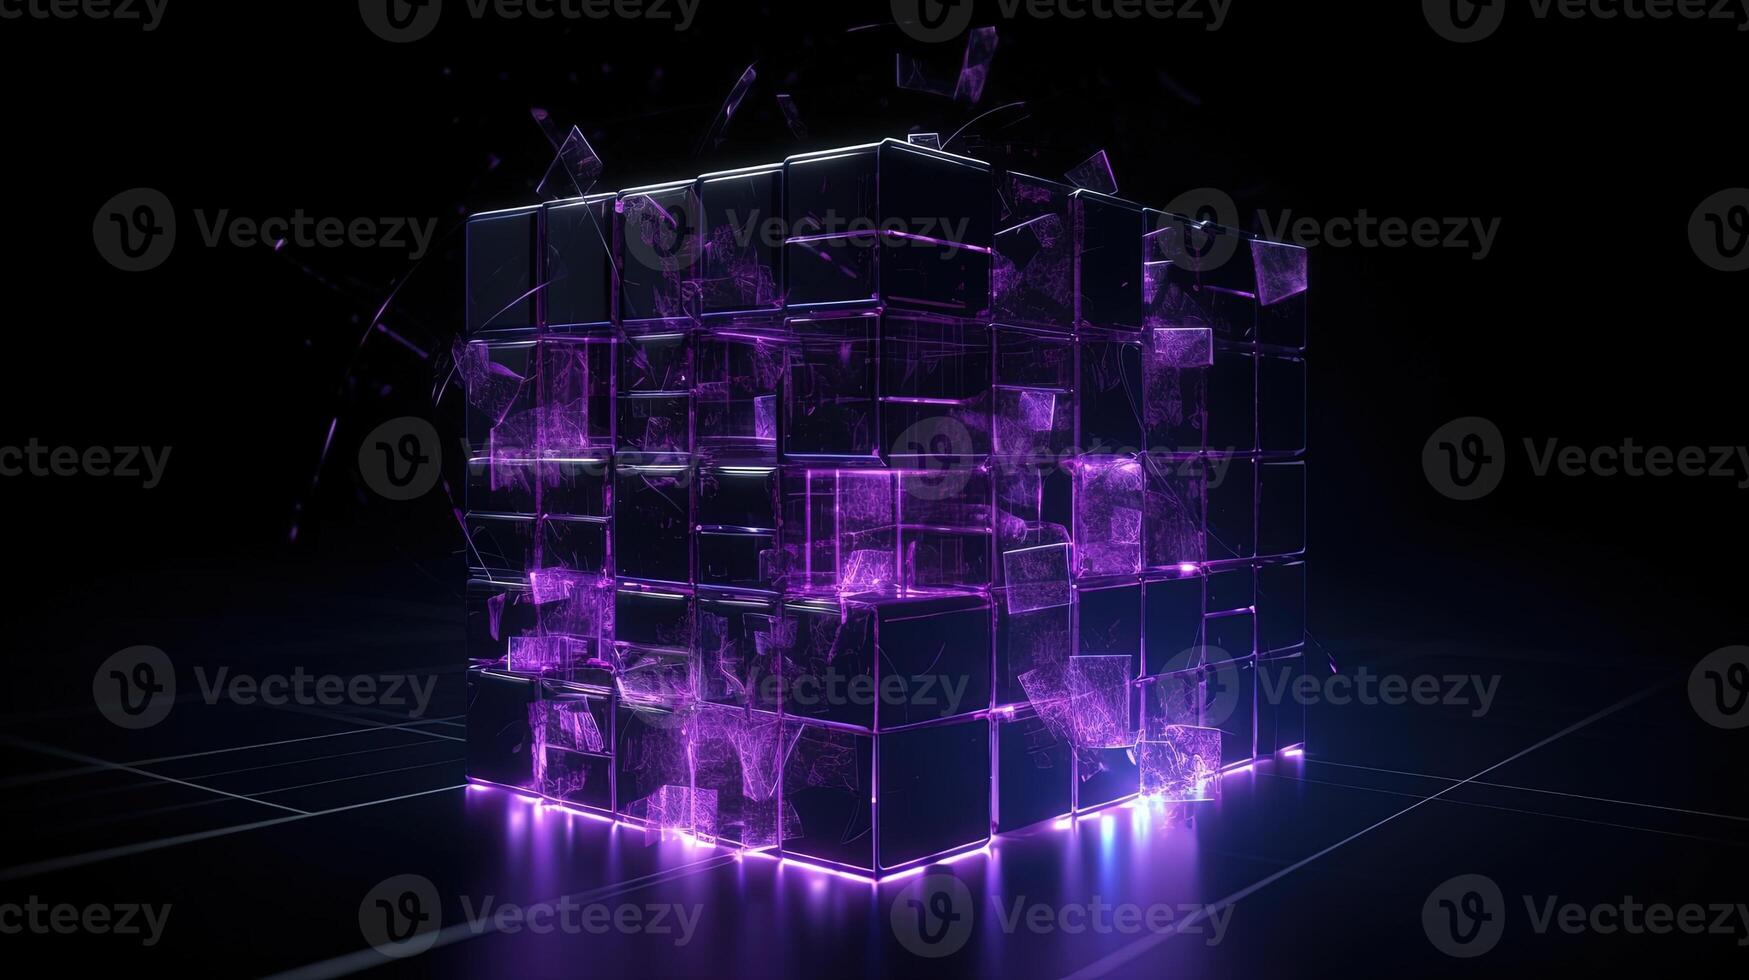 3d rendering of black cubes with purple neon lights on black background. photo